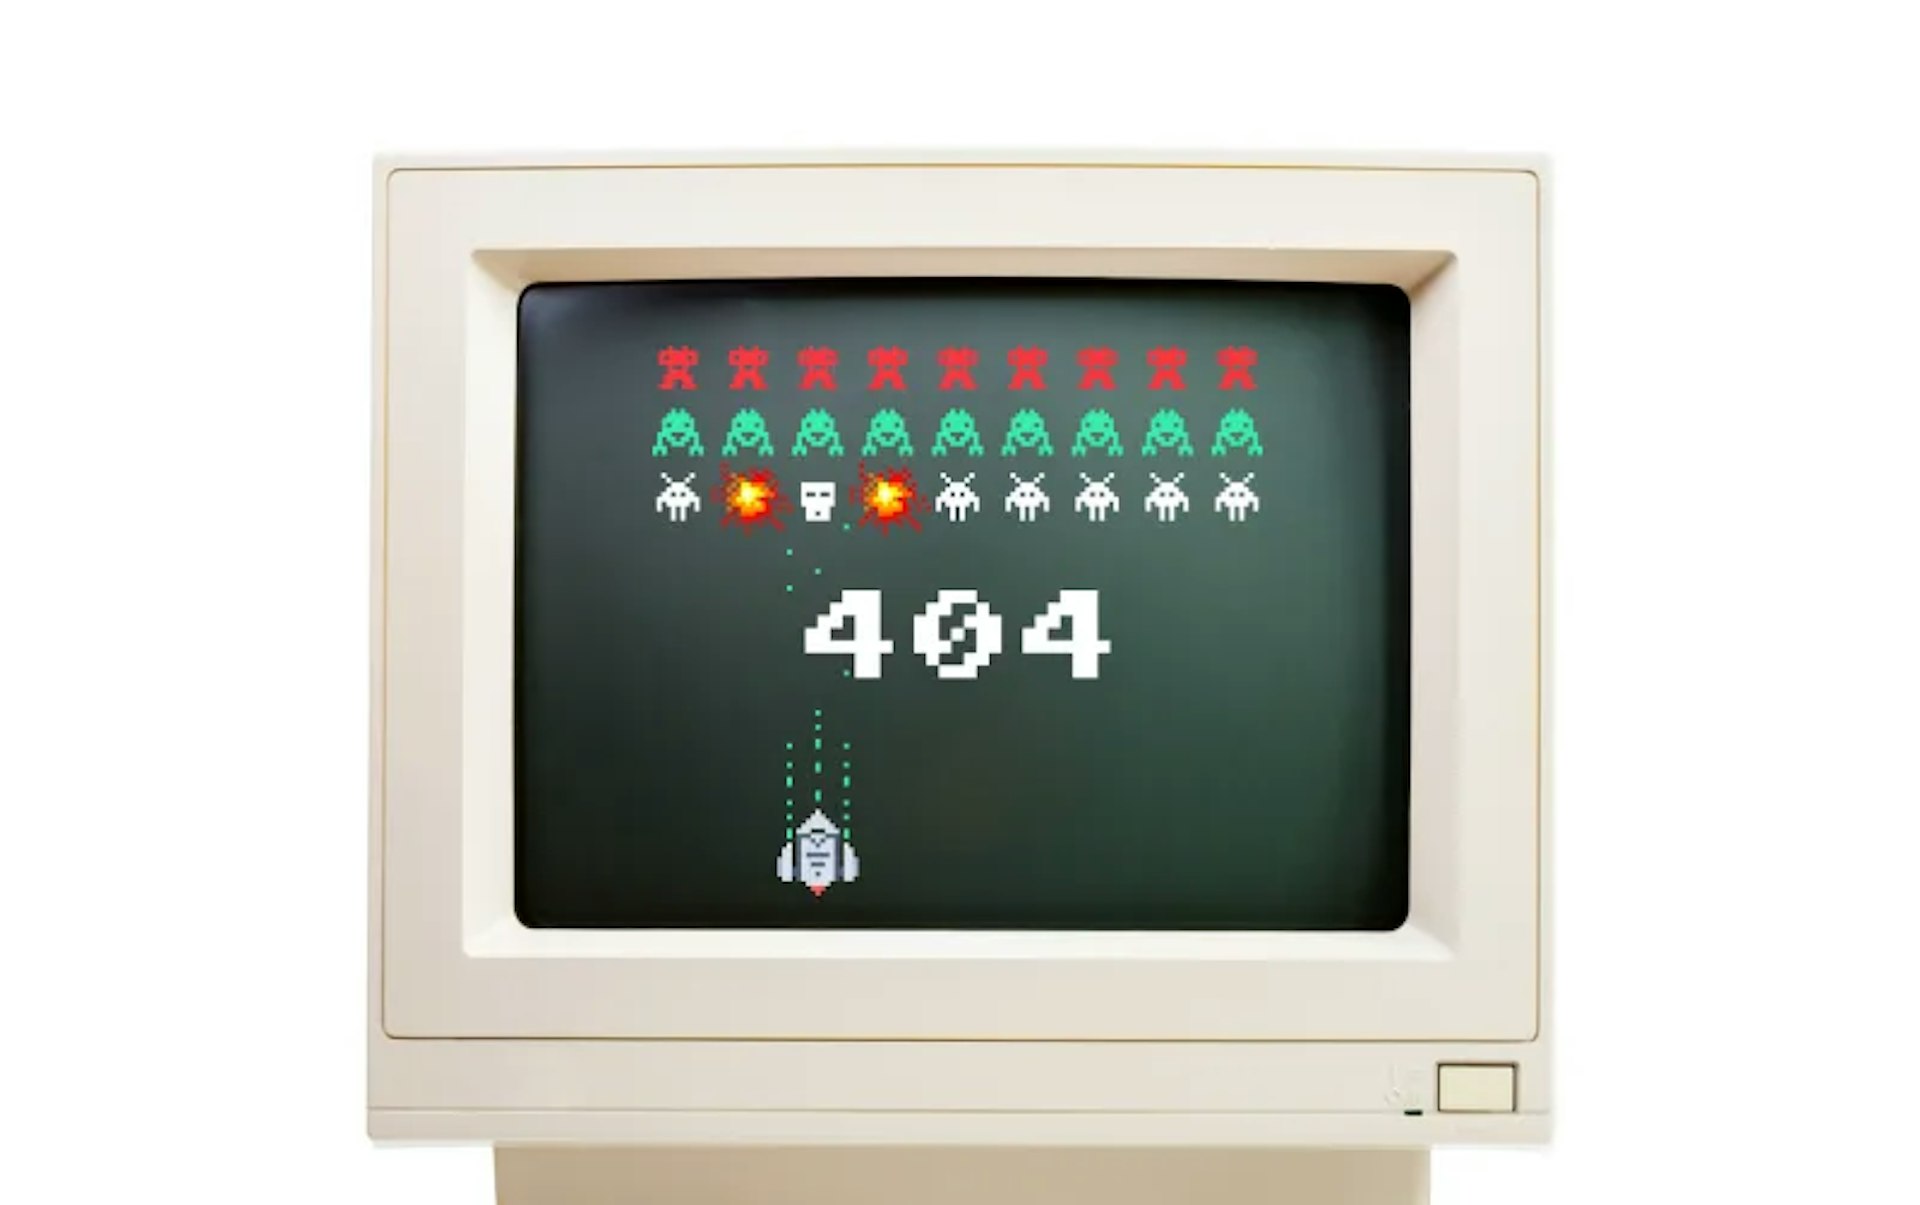 Building 404 Pages That Bring Joy